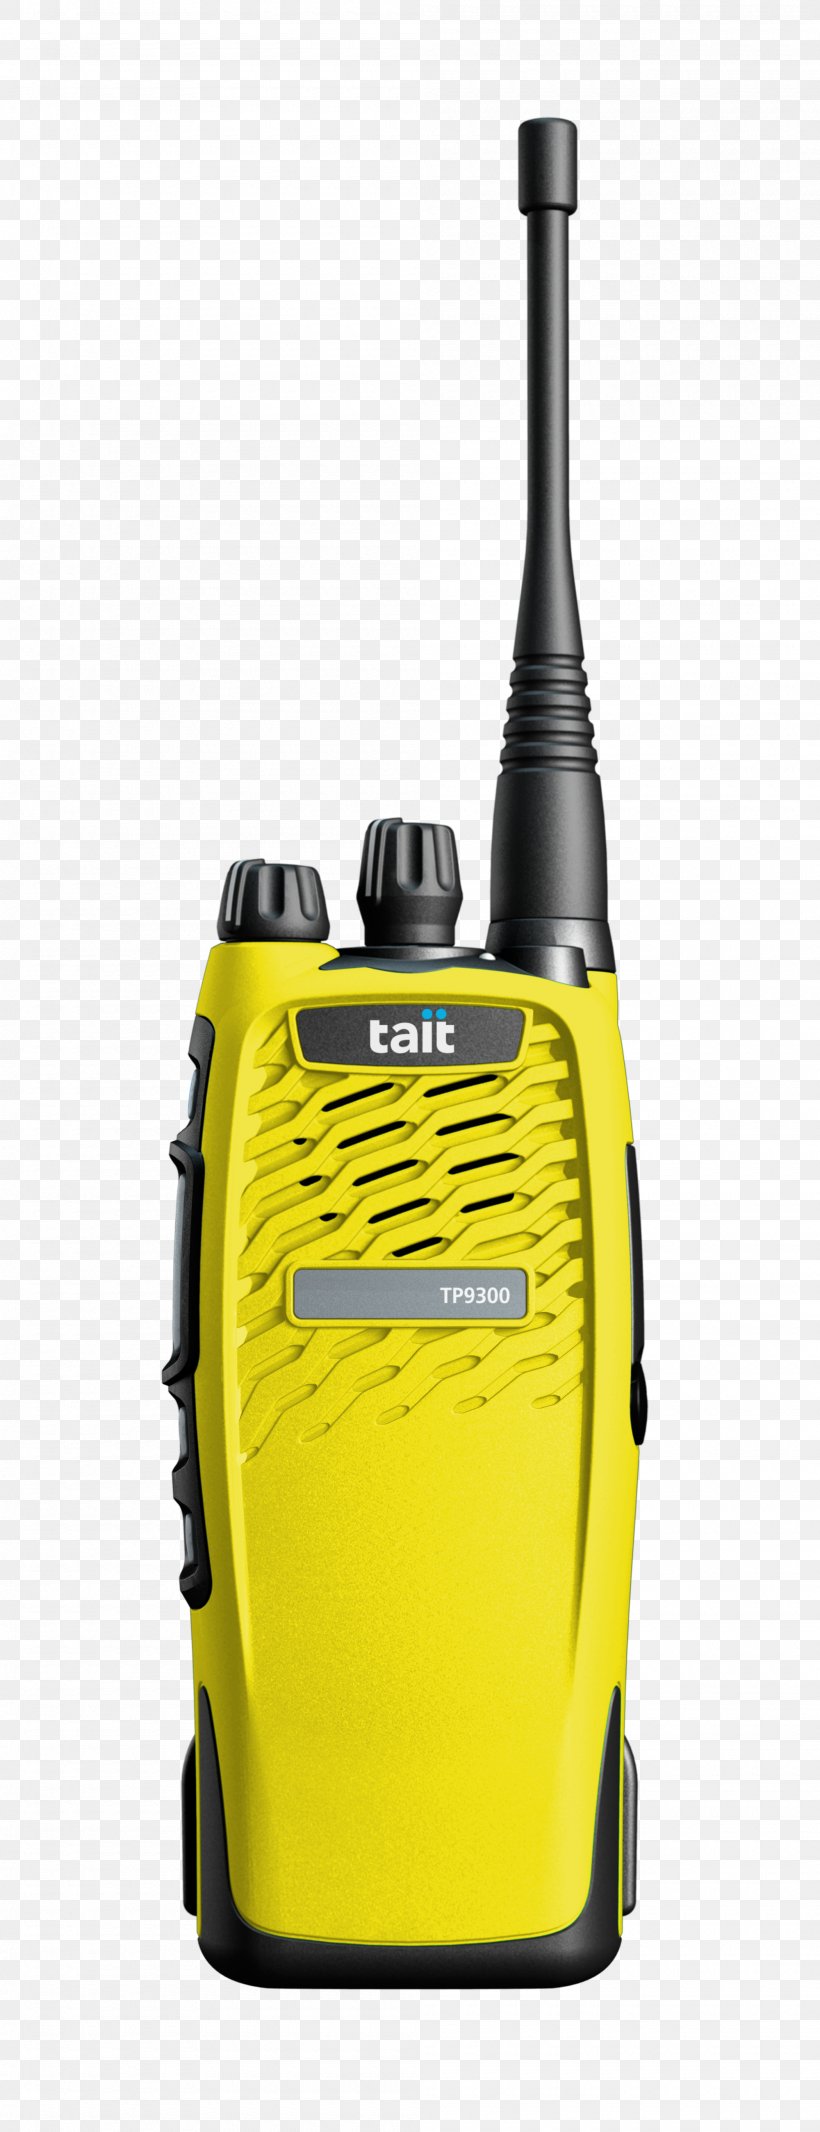 Digital Mobile Radio Tait Communications Project 25, PNG, 2000x5200px, Digital Mobile Radio, Aerials, Cylinder, Digital Radio, Dual Mode Mobile Download Free